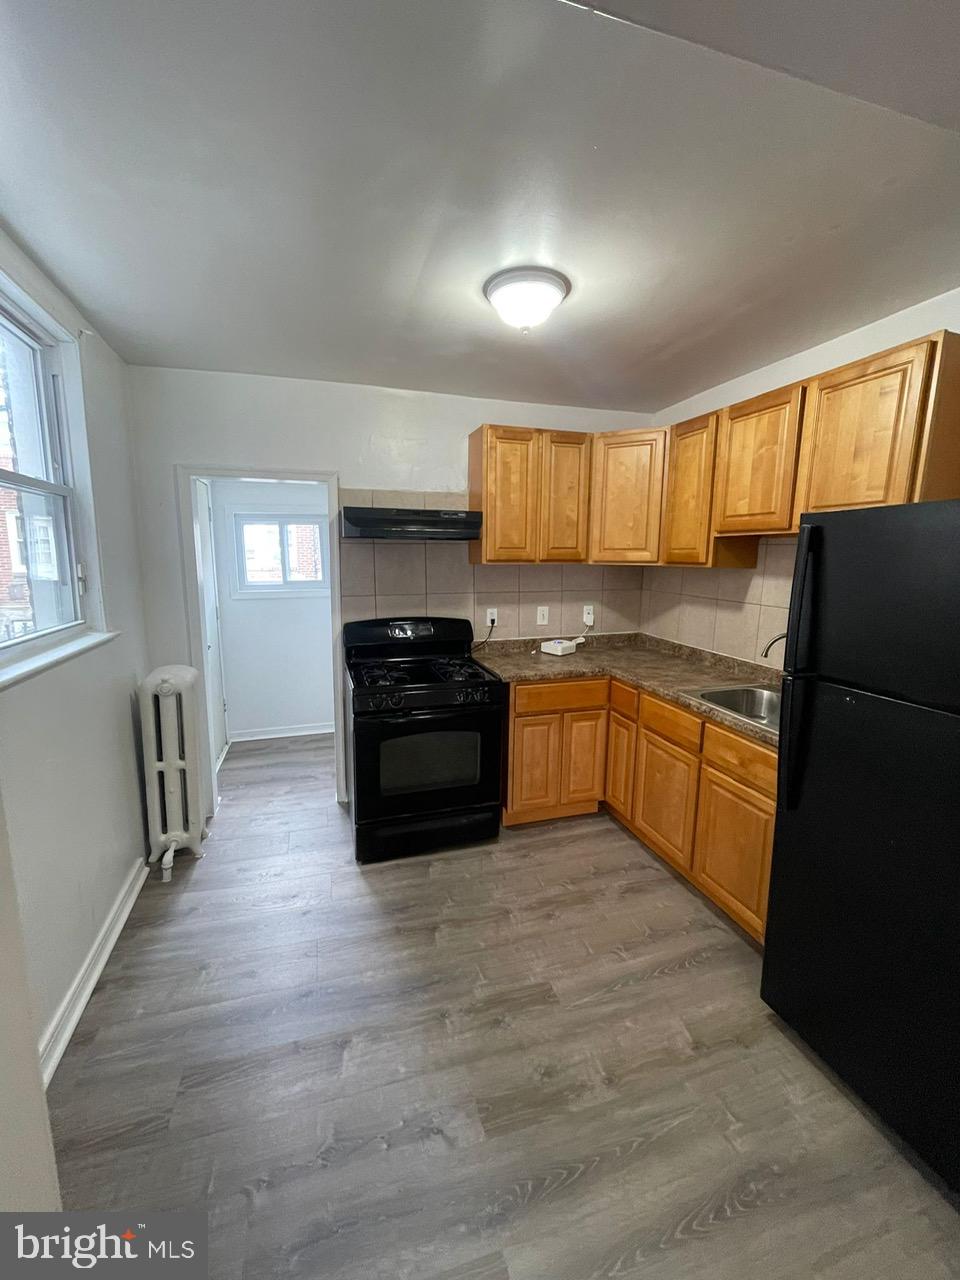 a kitchen with stainless steel appliances granite countertop a stove a sink dishwasher a refrigerator and a cabinets